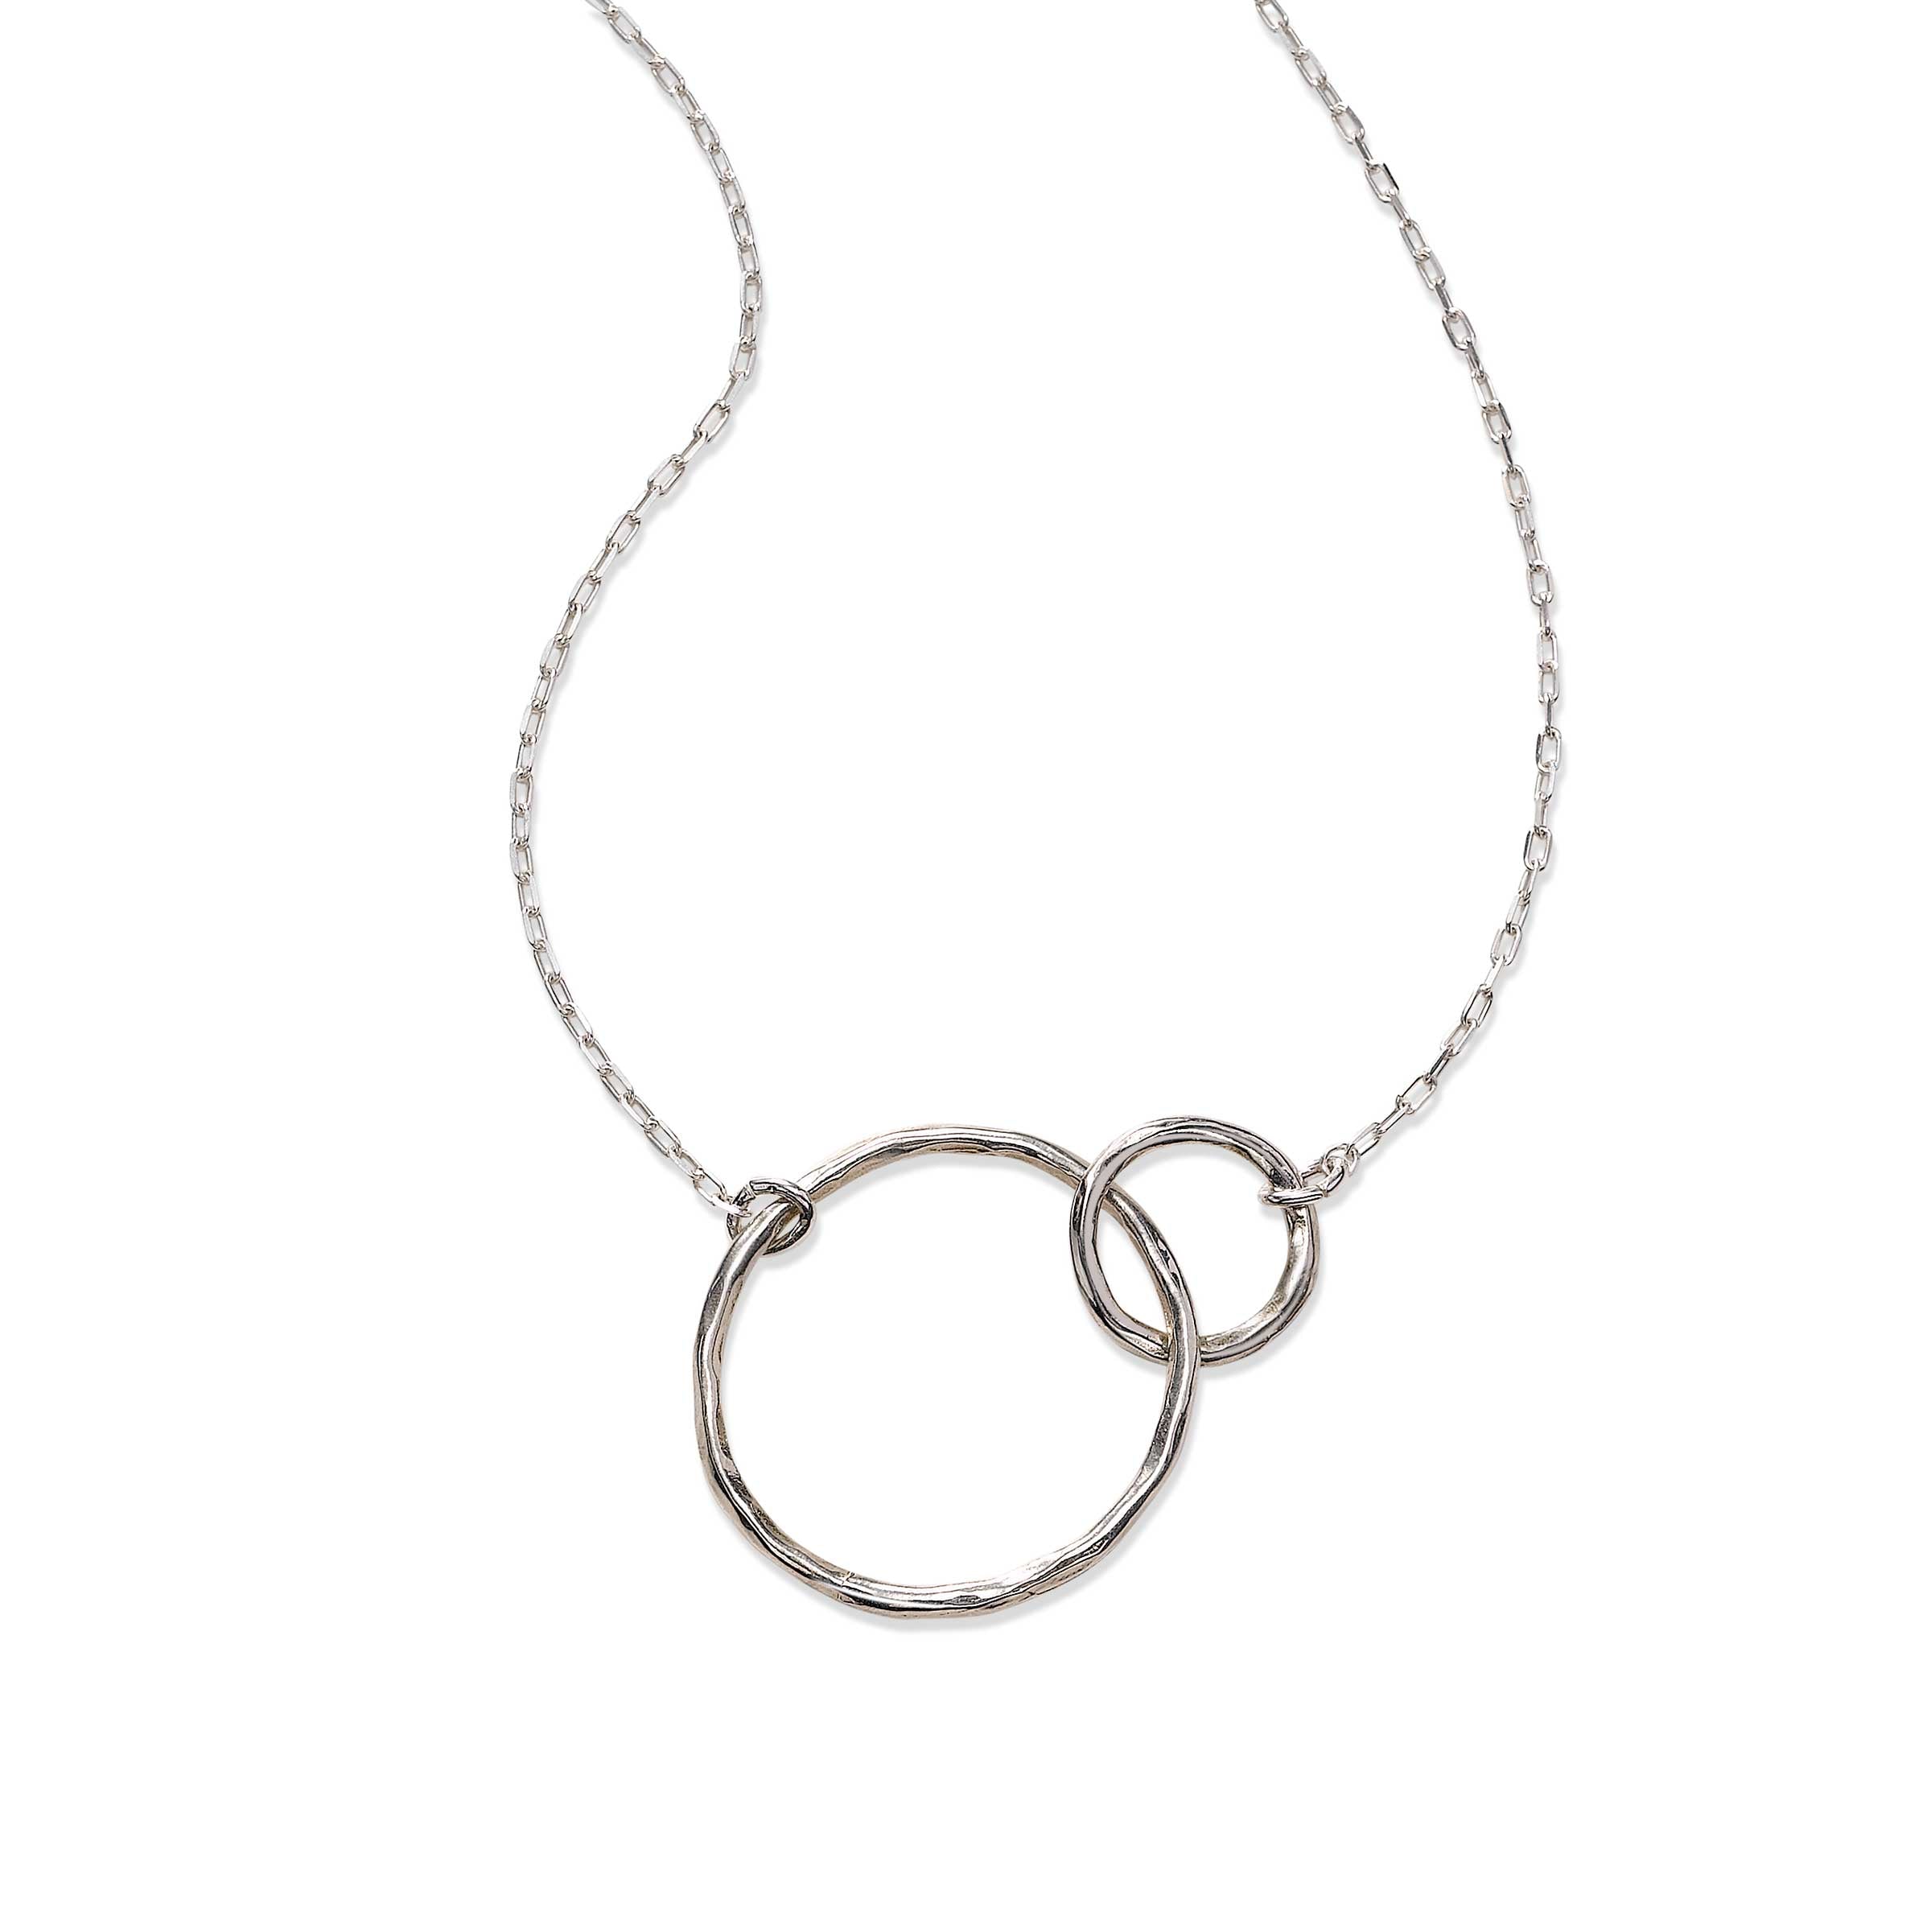 Silver Interlocking Circles Necklace - All The Falling Stars